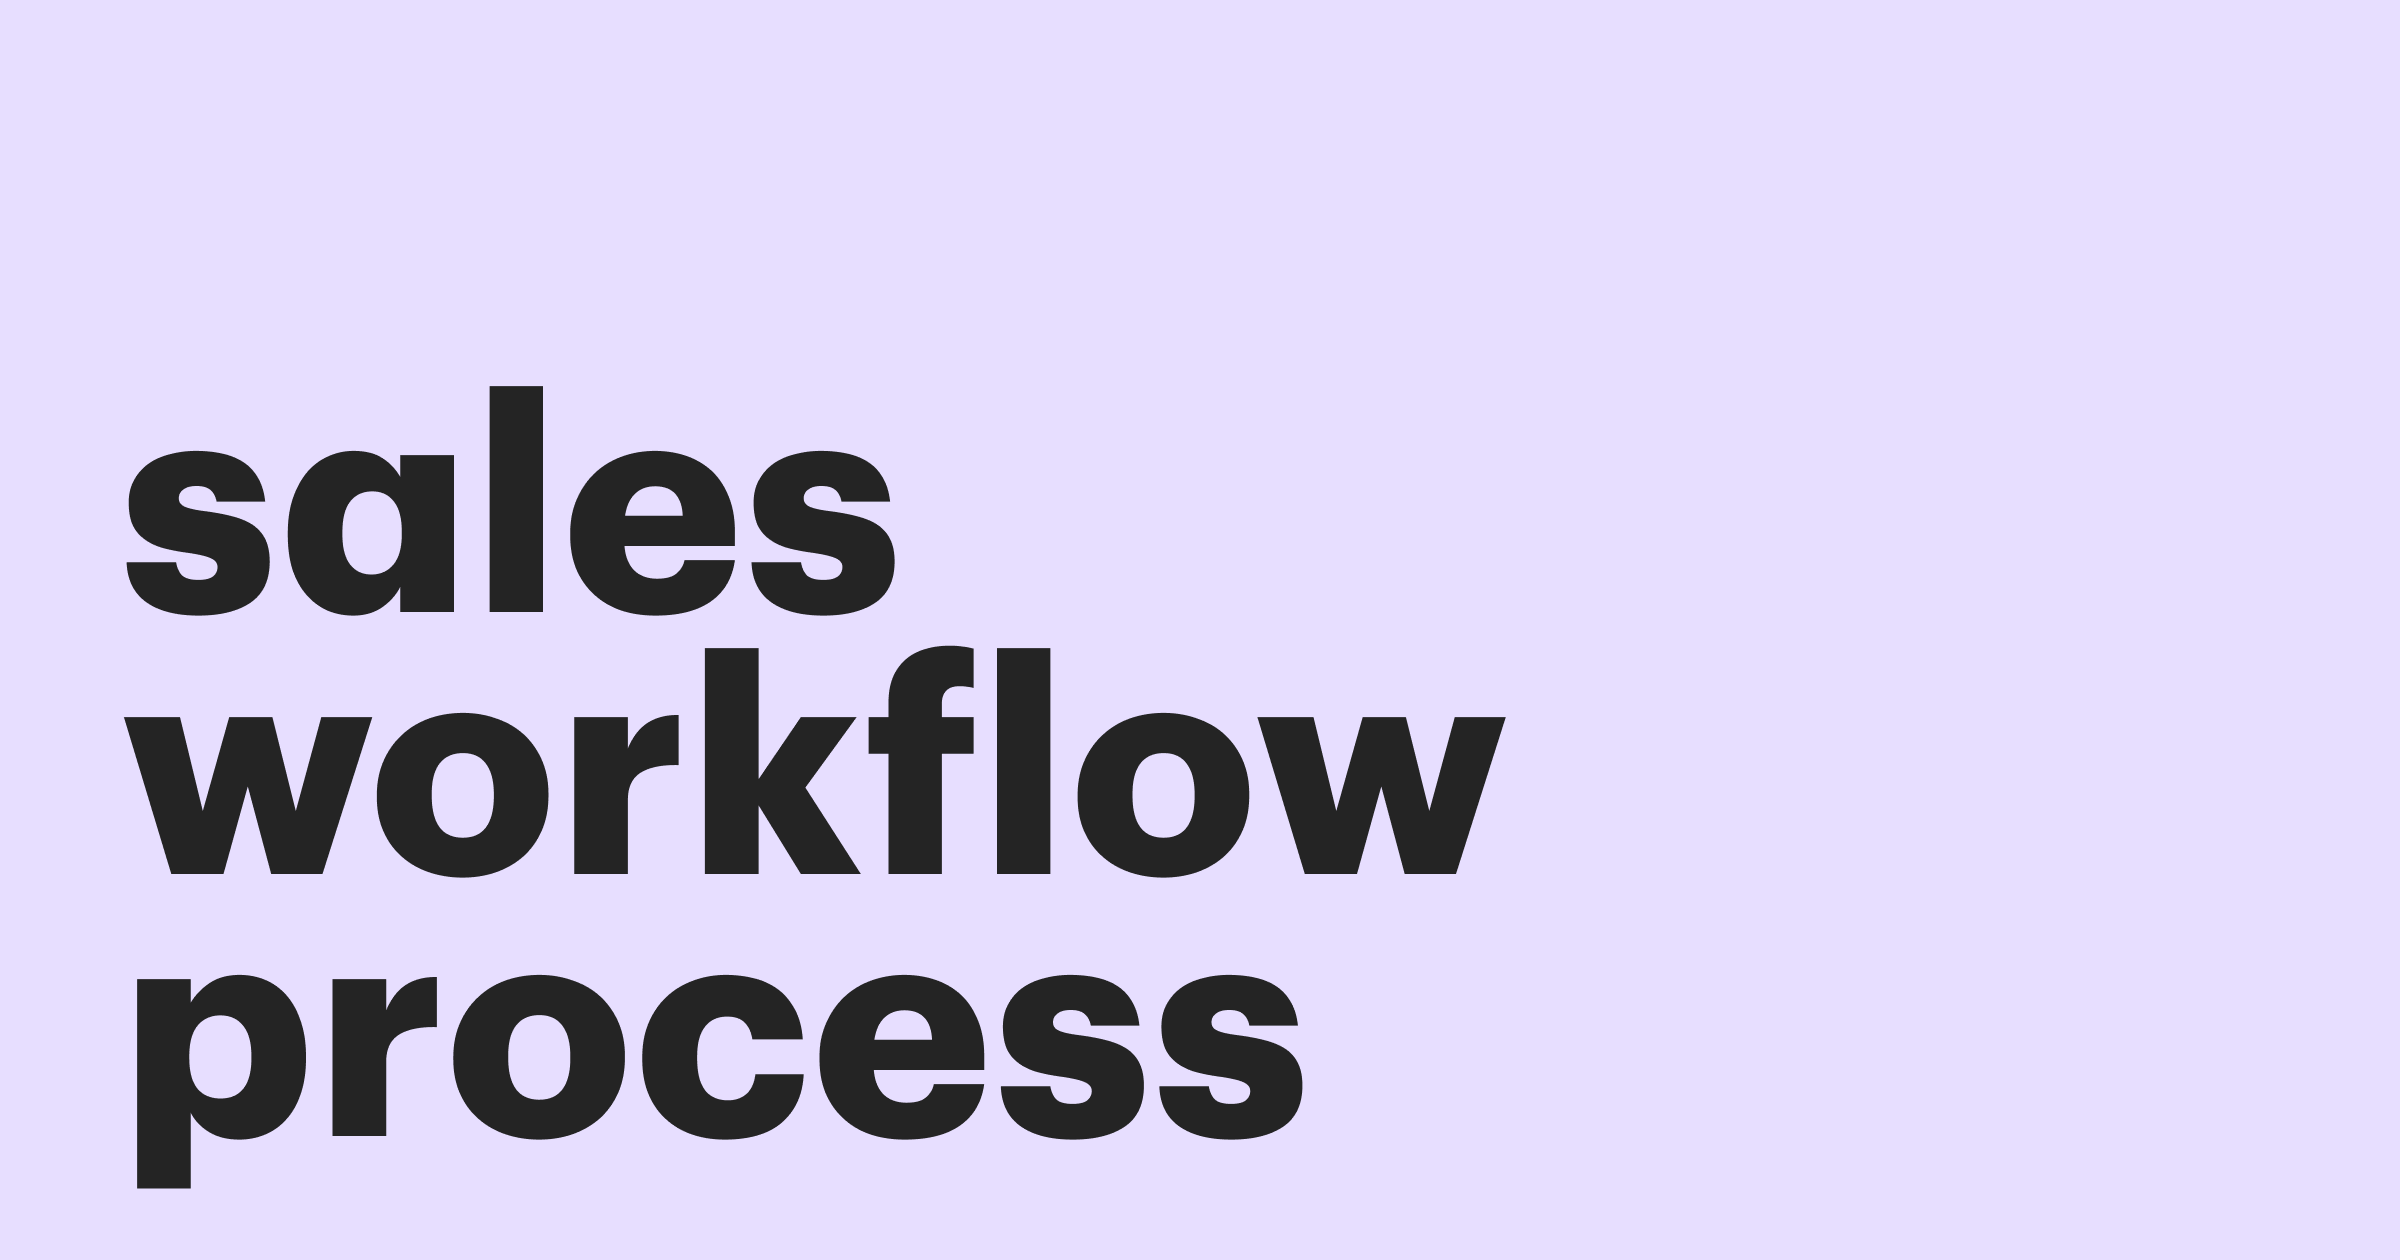 A guide to sales workflow process to increase your profit